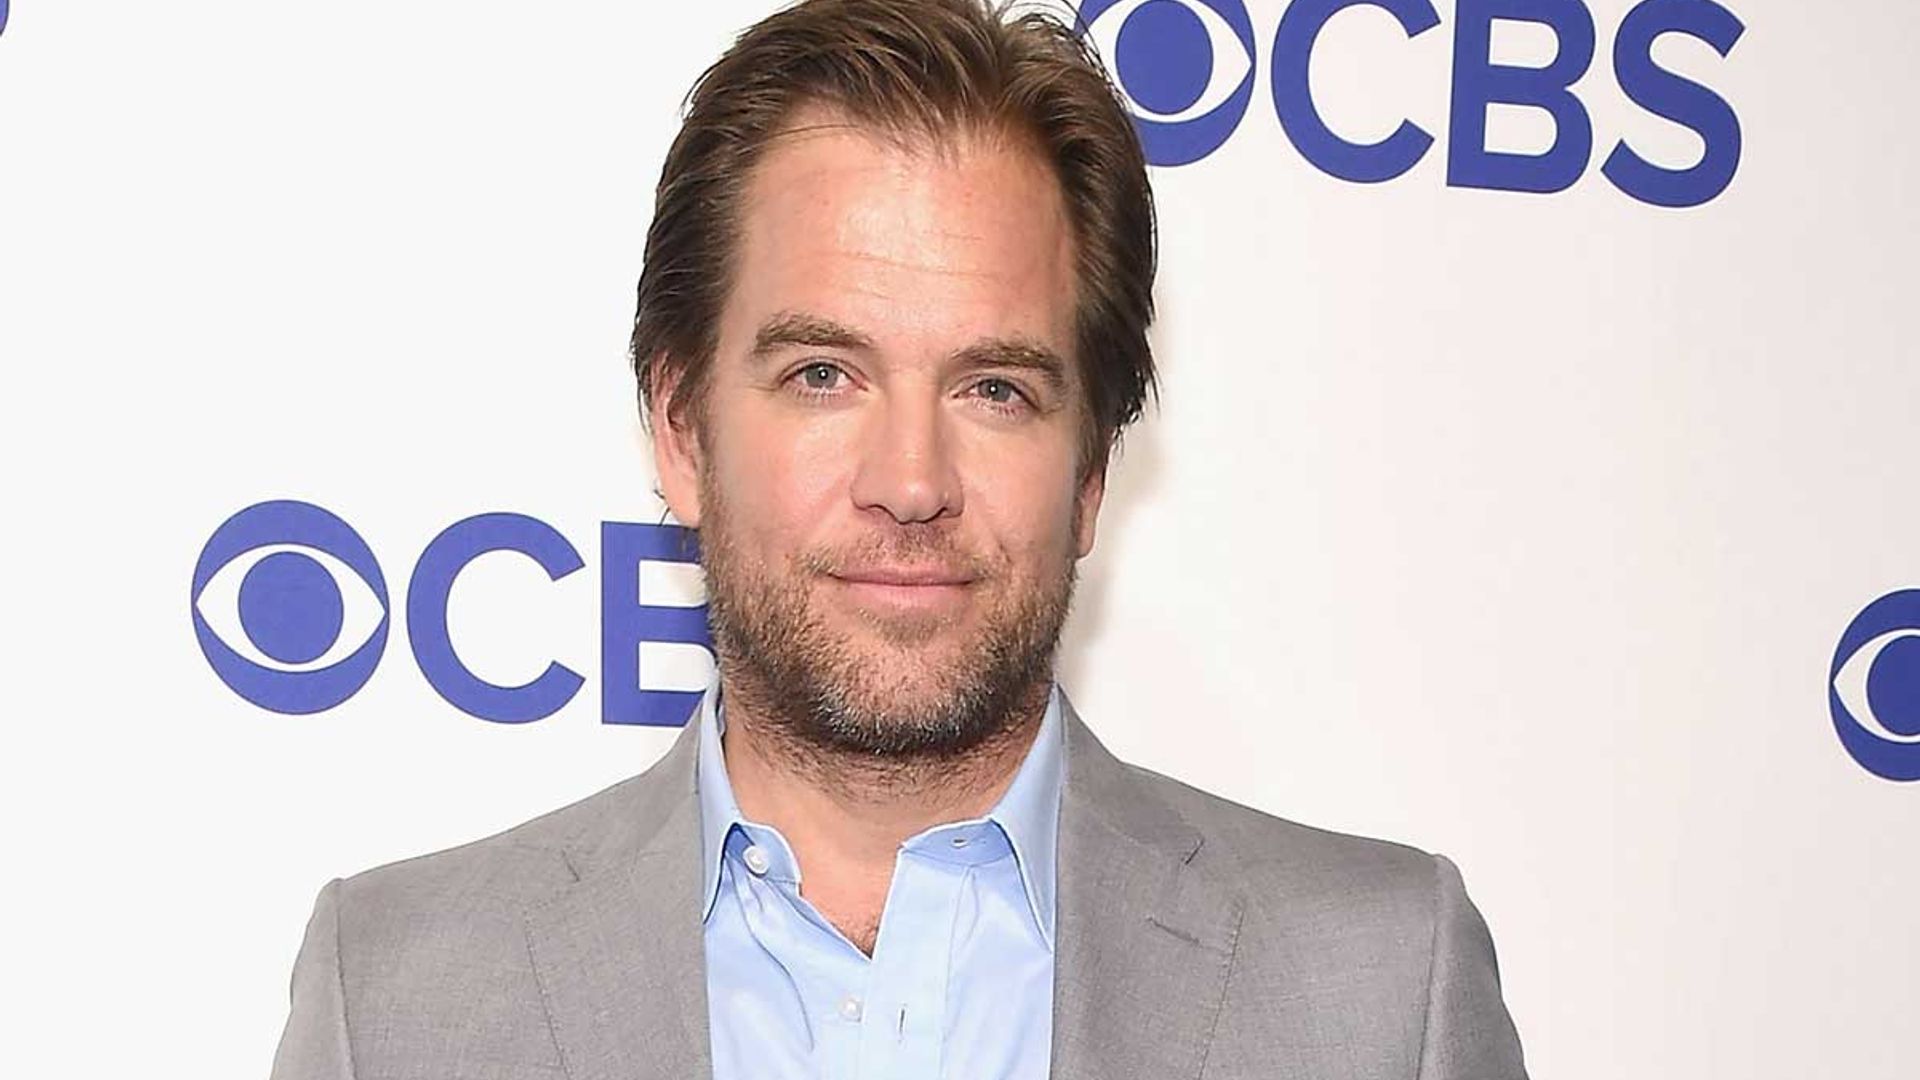 NCIS' Michael Weatherly shares rare photo of daughter as they mark